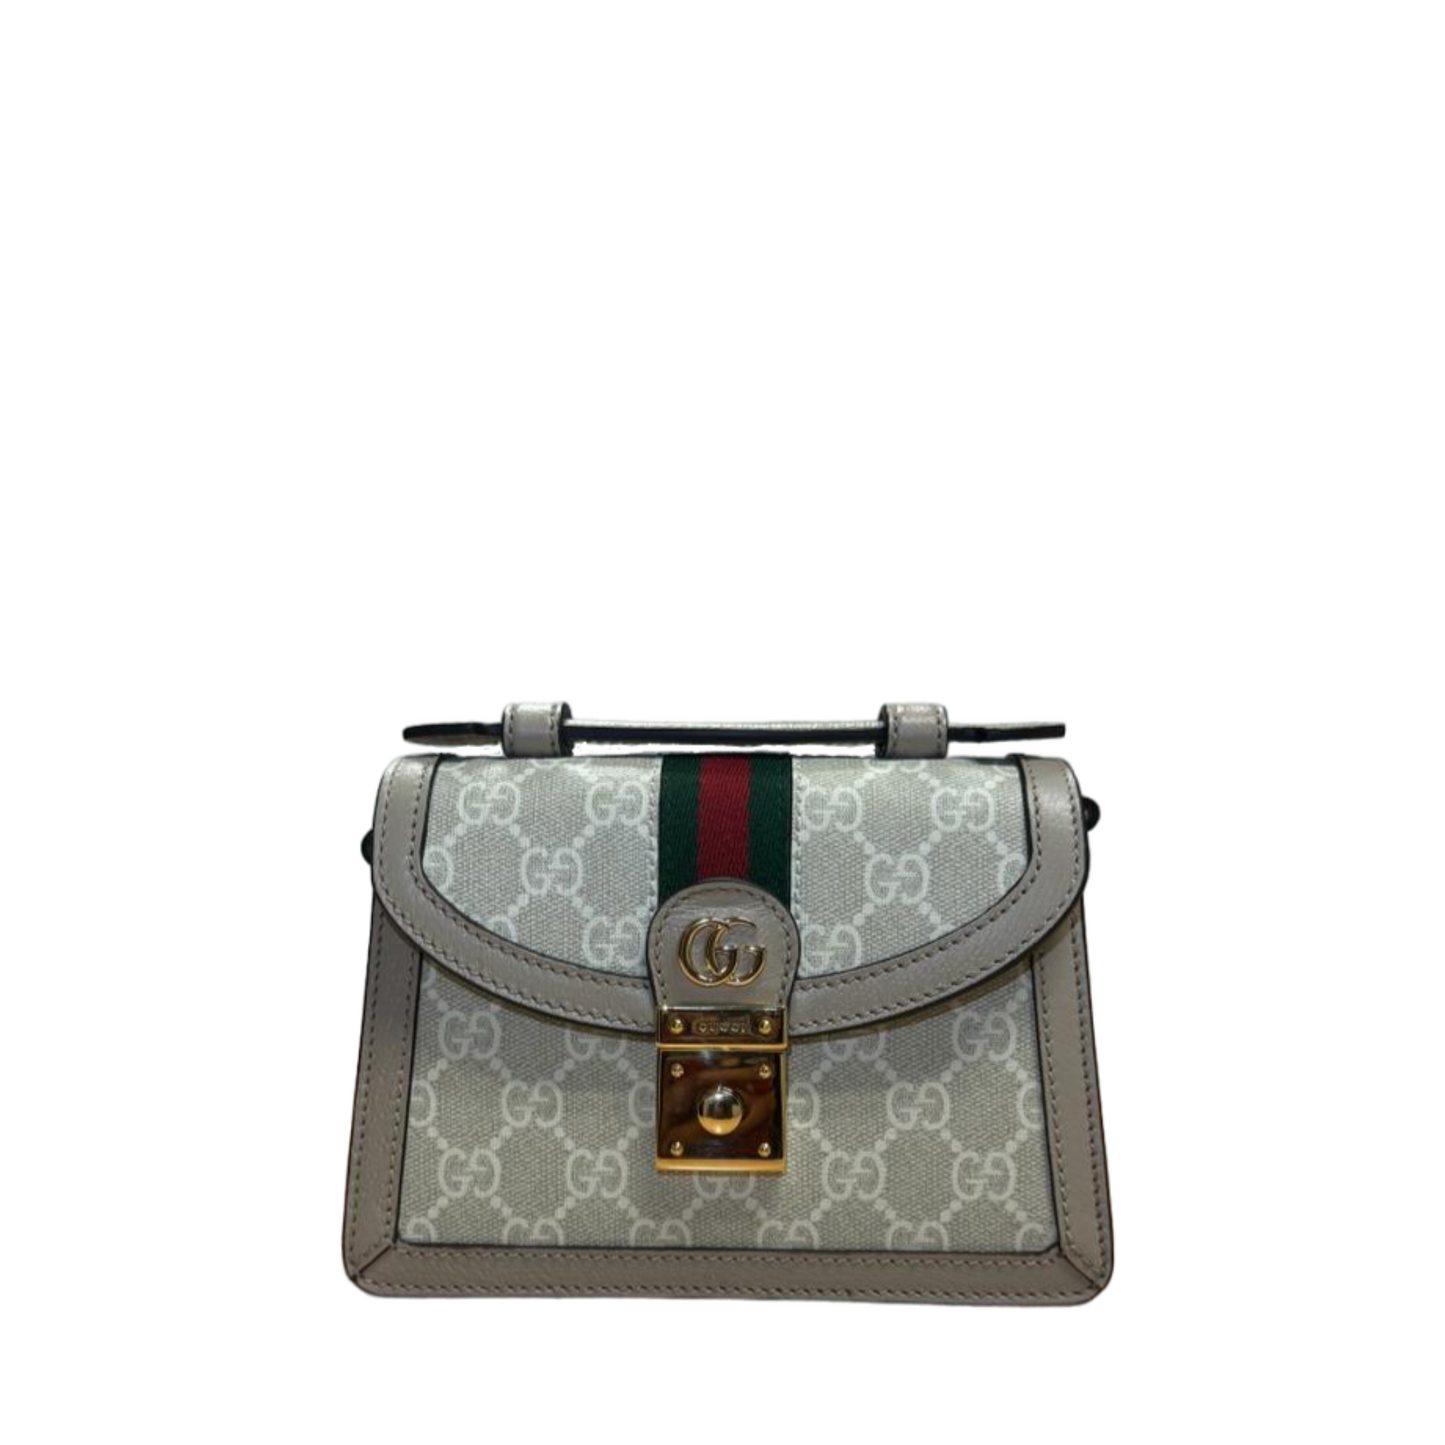 Gucci Ophidia GG Mini Shoulder Bag White and Beige